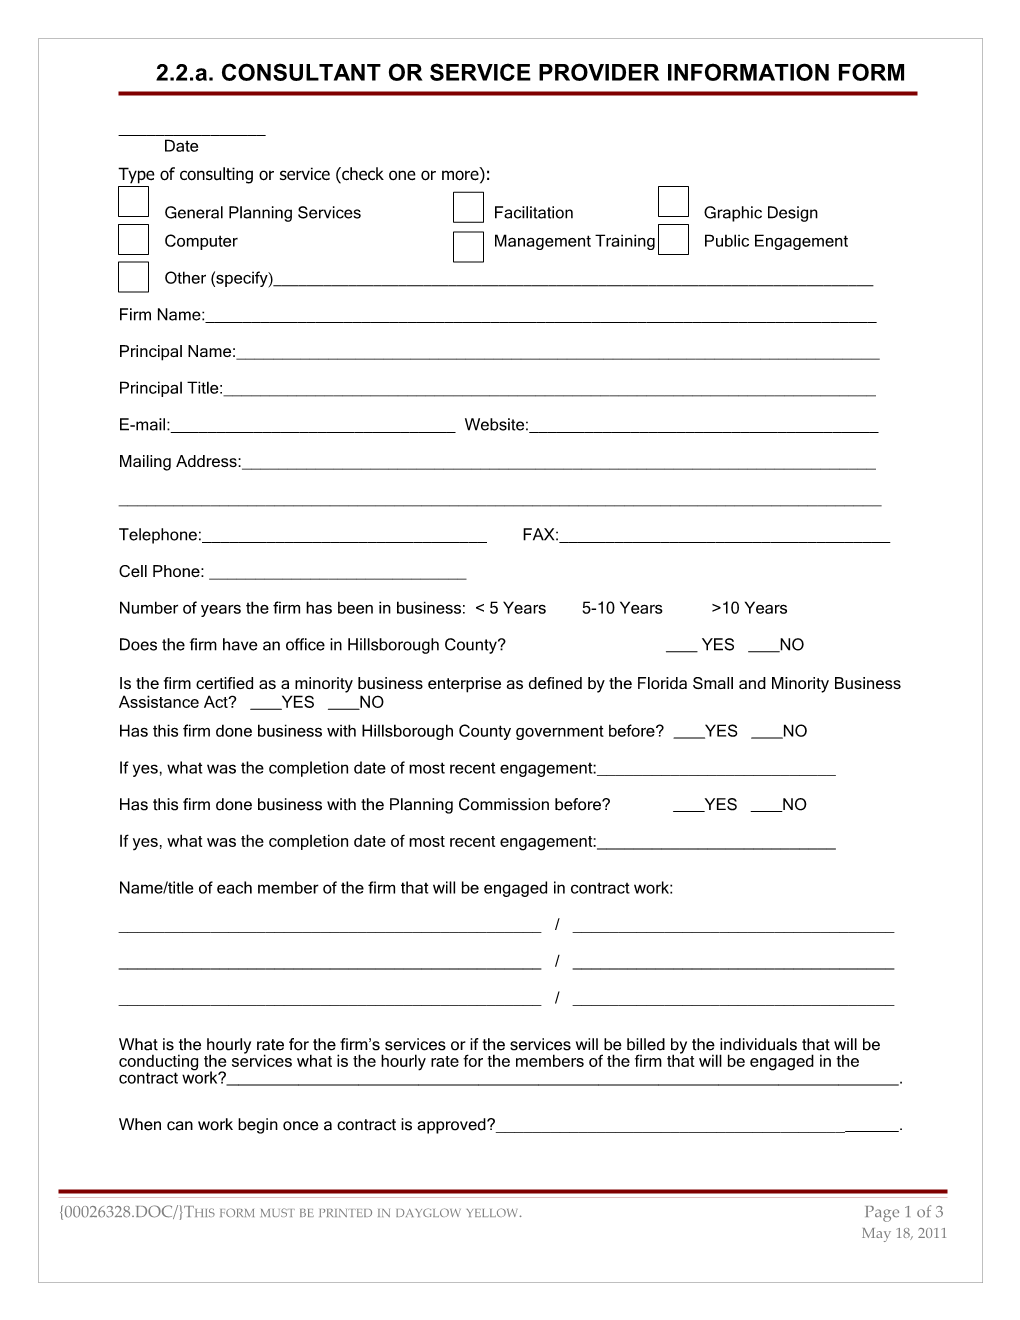 HCCCPC: Consultant Information Form (00026328)